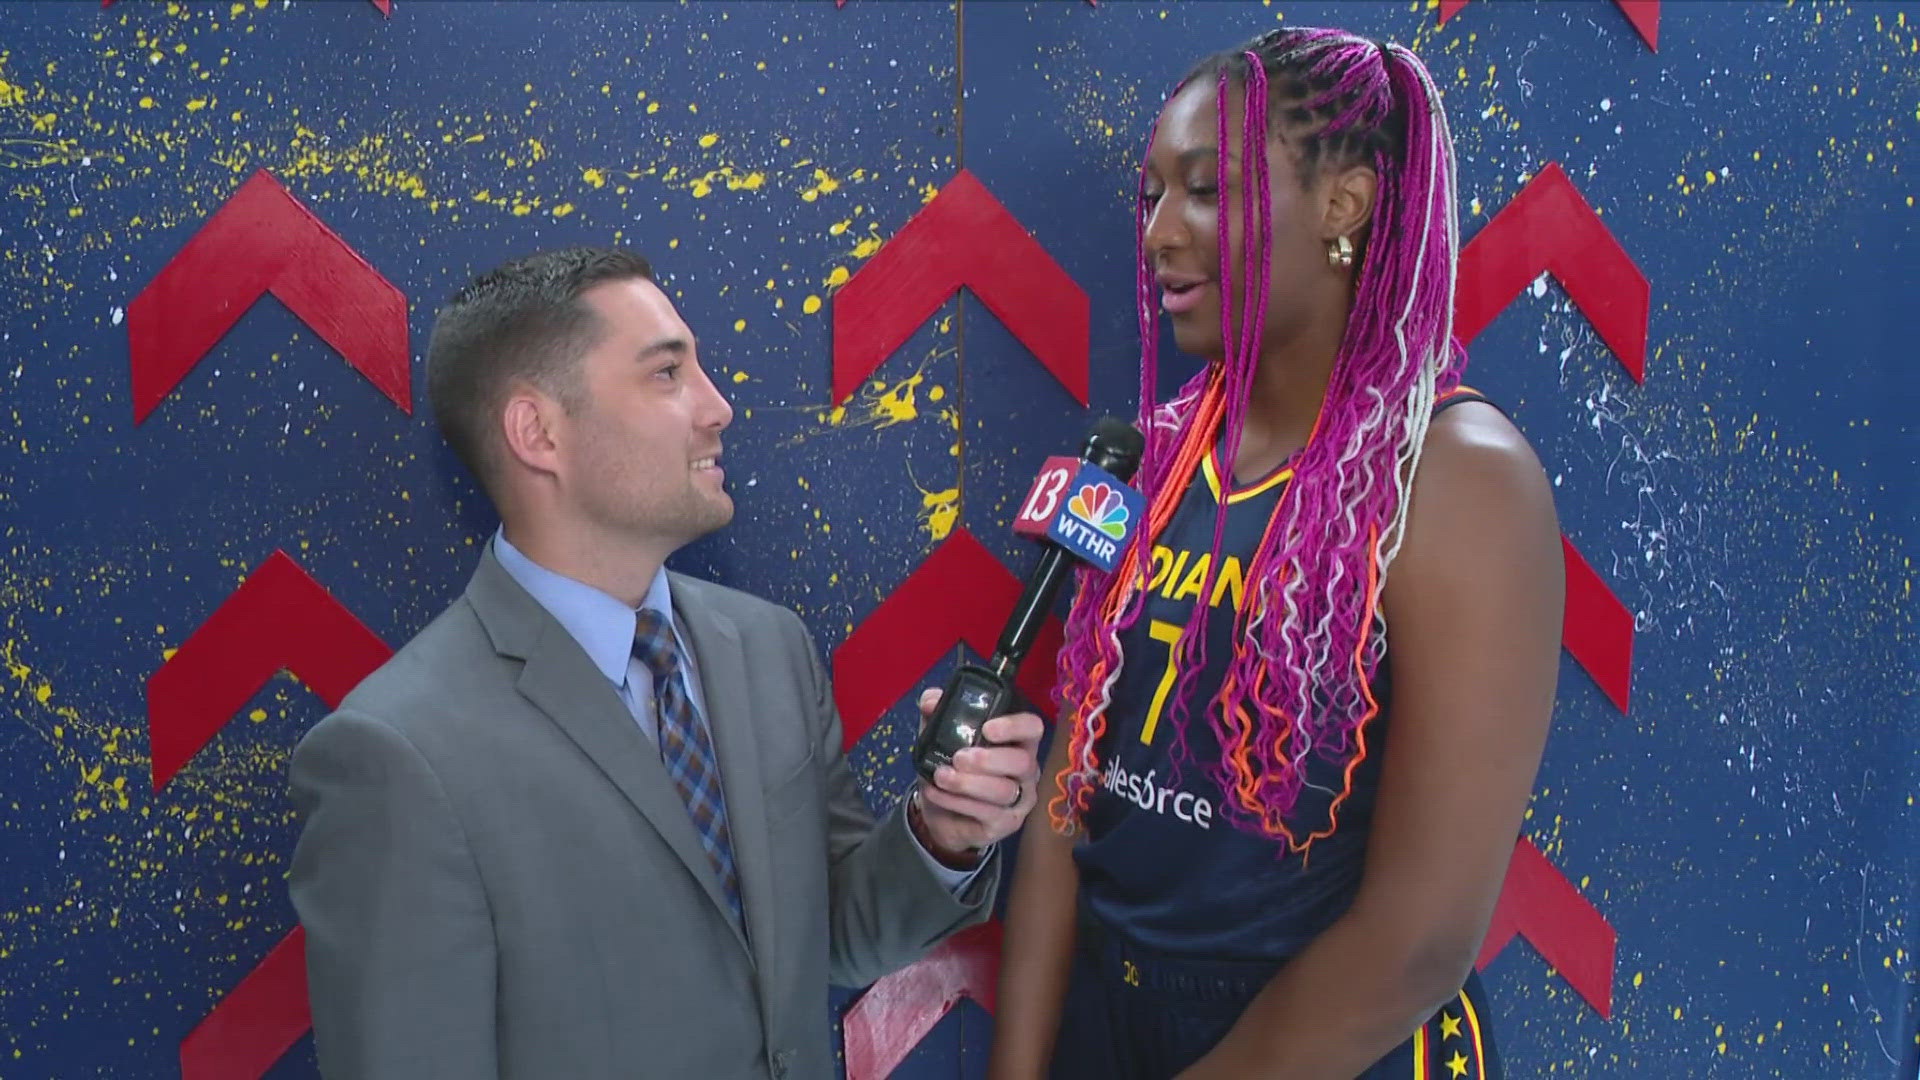 13Sports reporter Dominic Miranda reports from Fever media day and talks with reigning Rookie of the Year Aliyah Boston about the upcoming season.